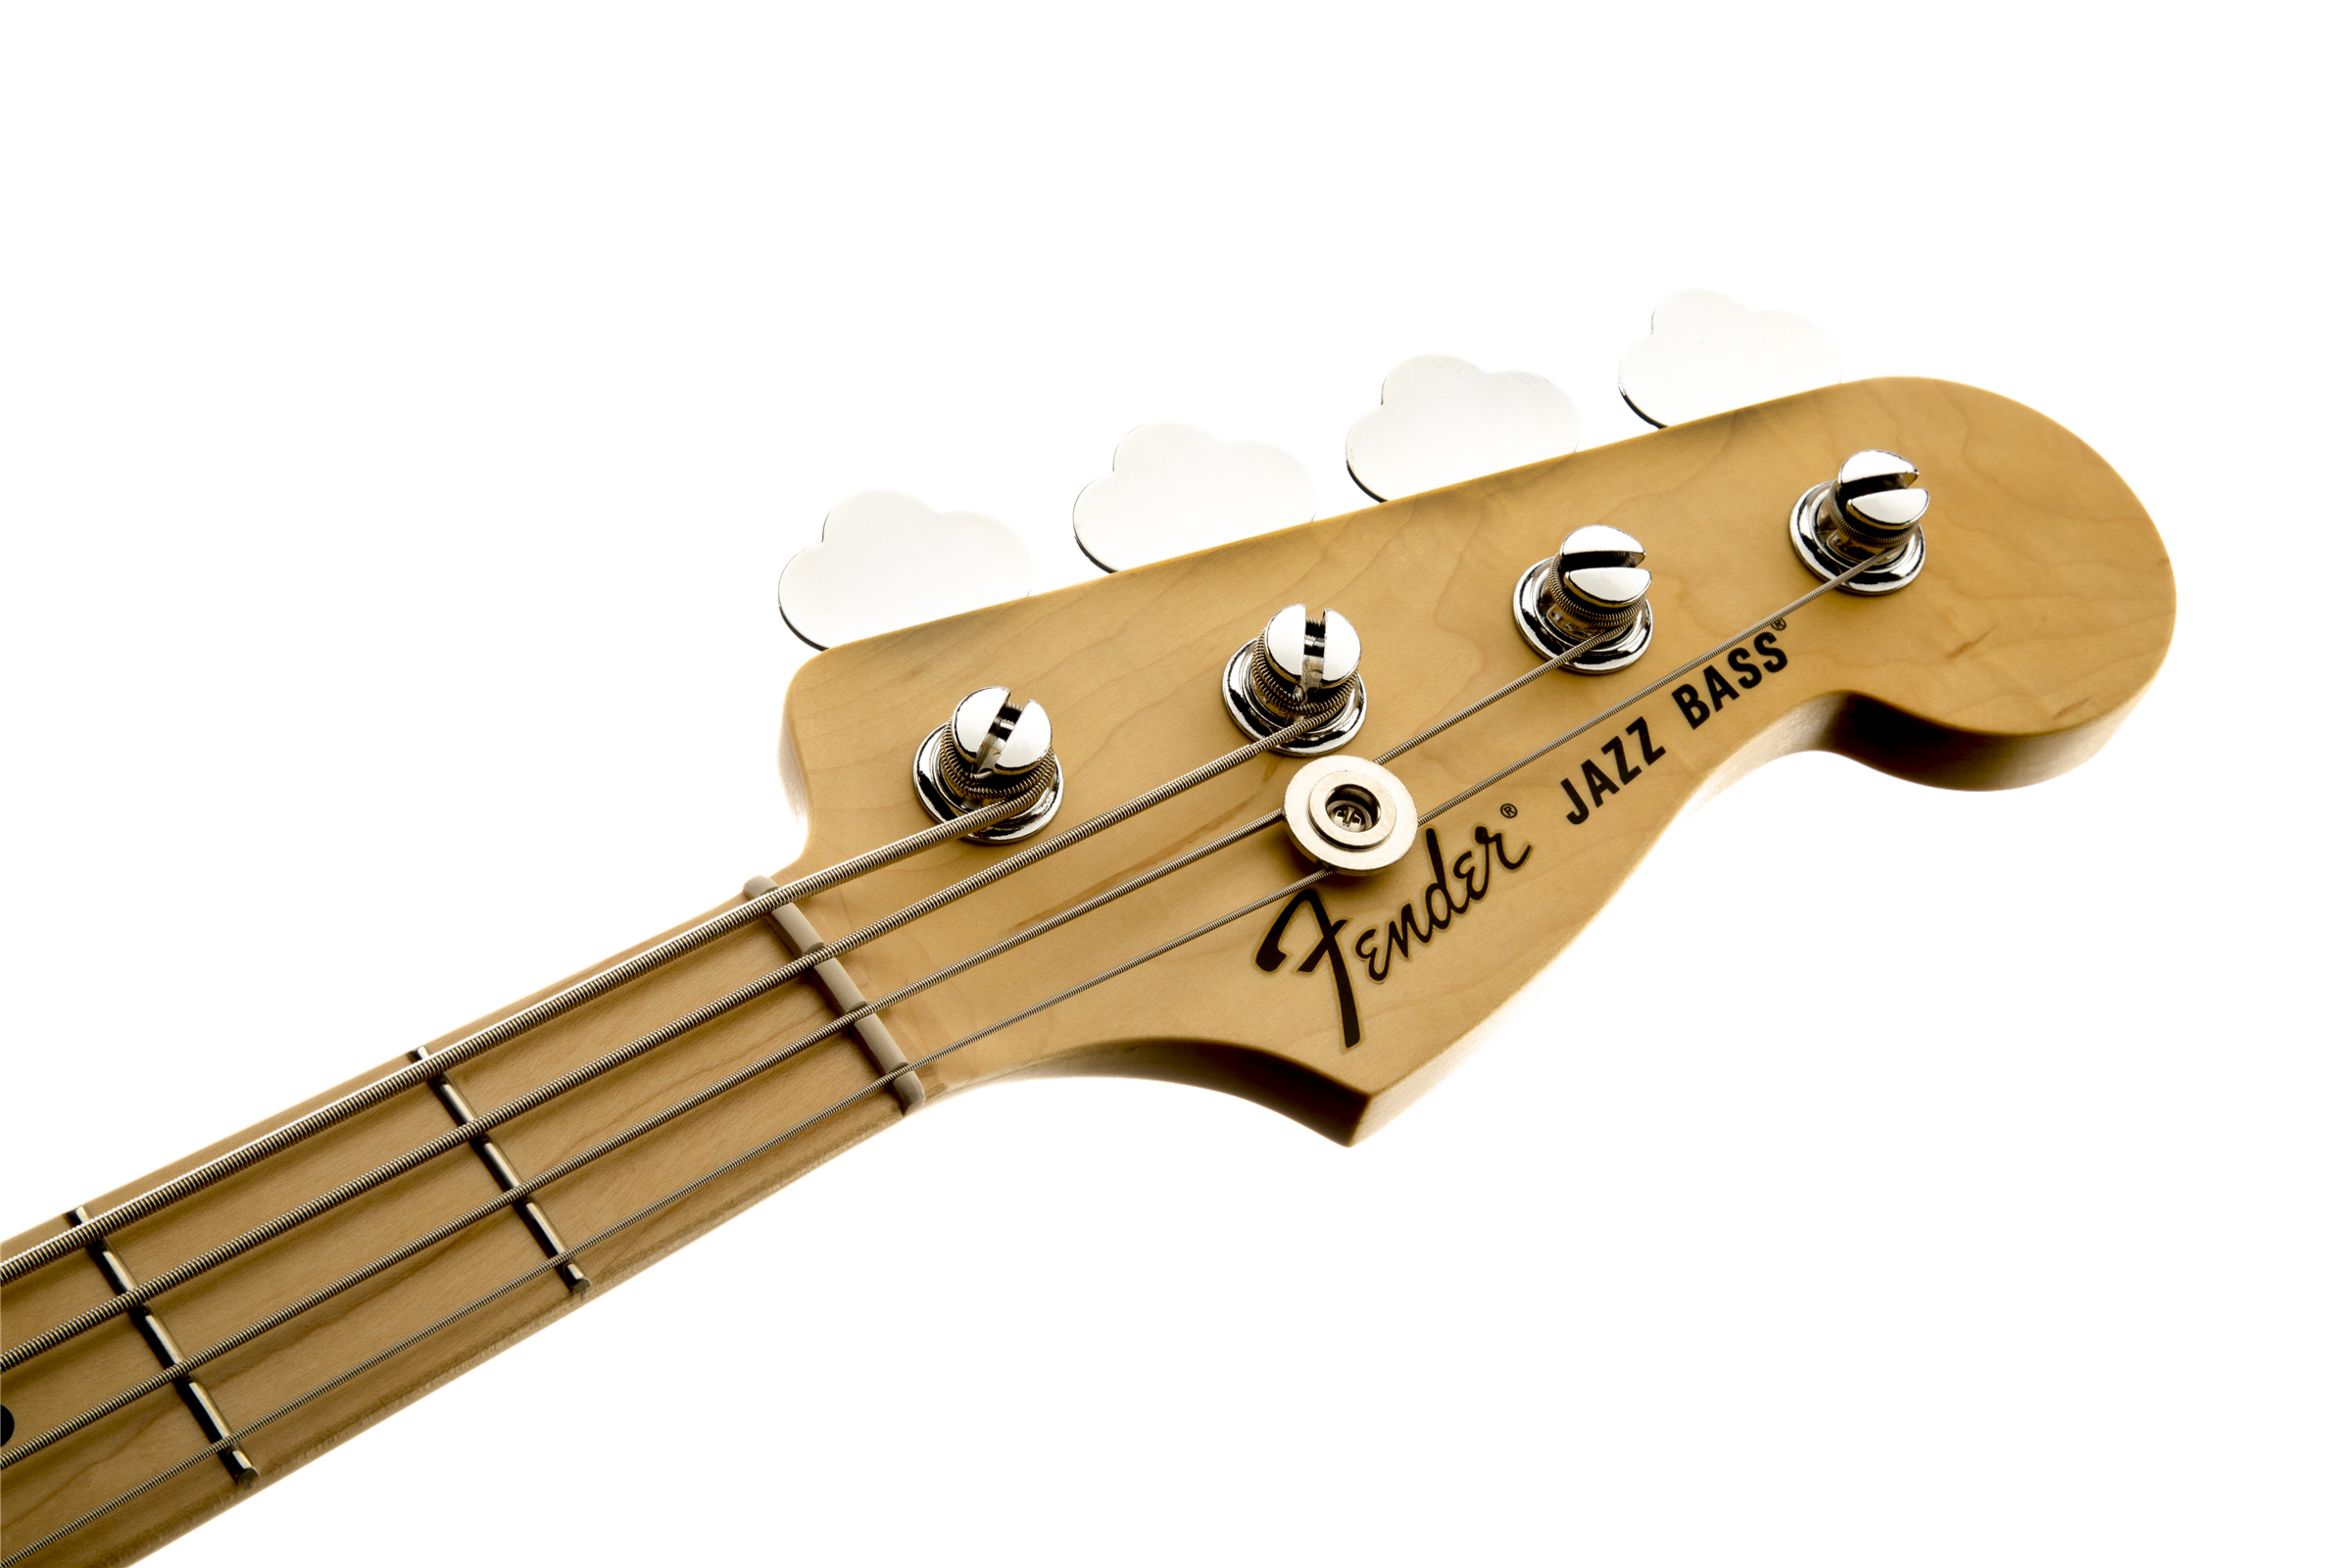 Limited Edition Sandblasted Jazz Bass with Ash Body